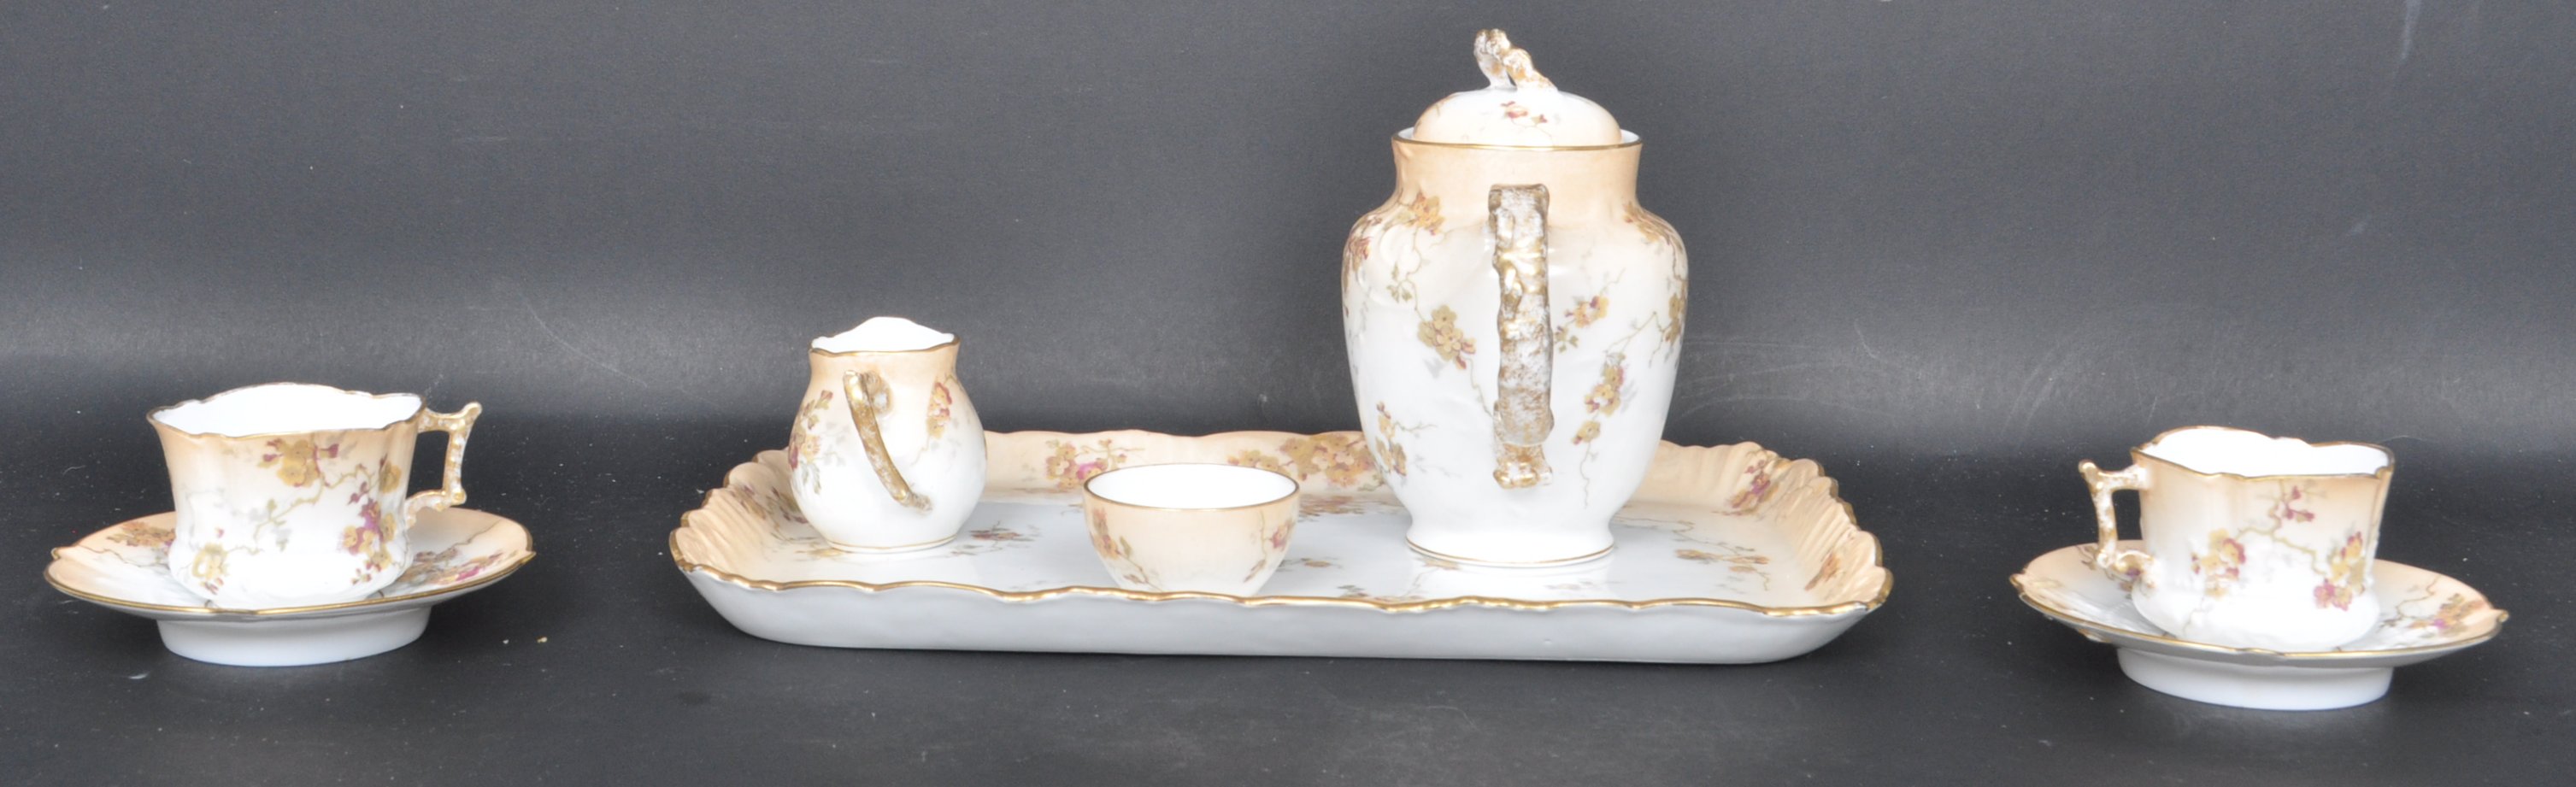 CIRCA 1900 LIMOGES 'TEA FOR TWO' CHINA SERVICE - Image 5 of 6